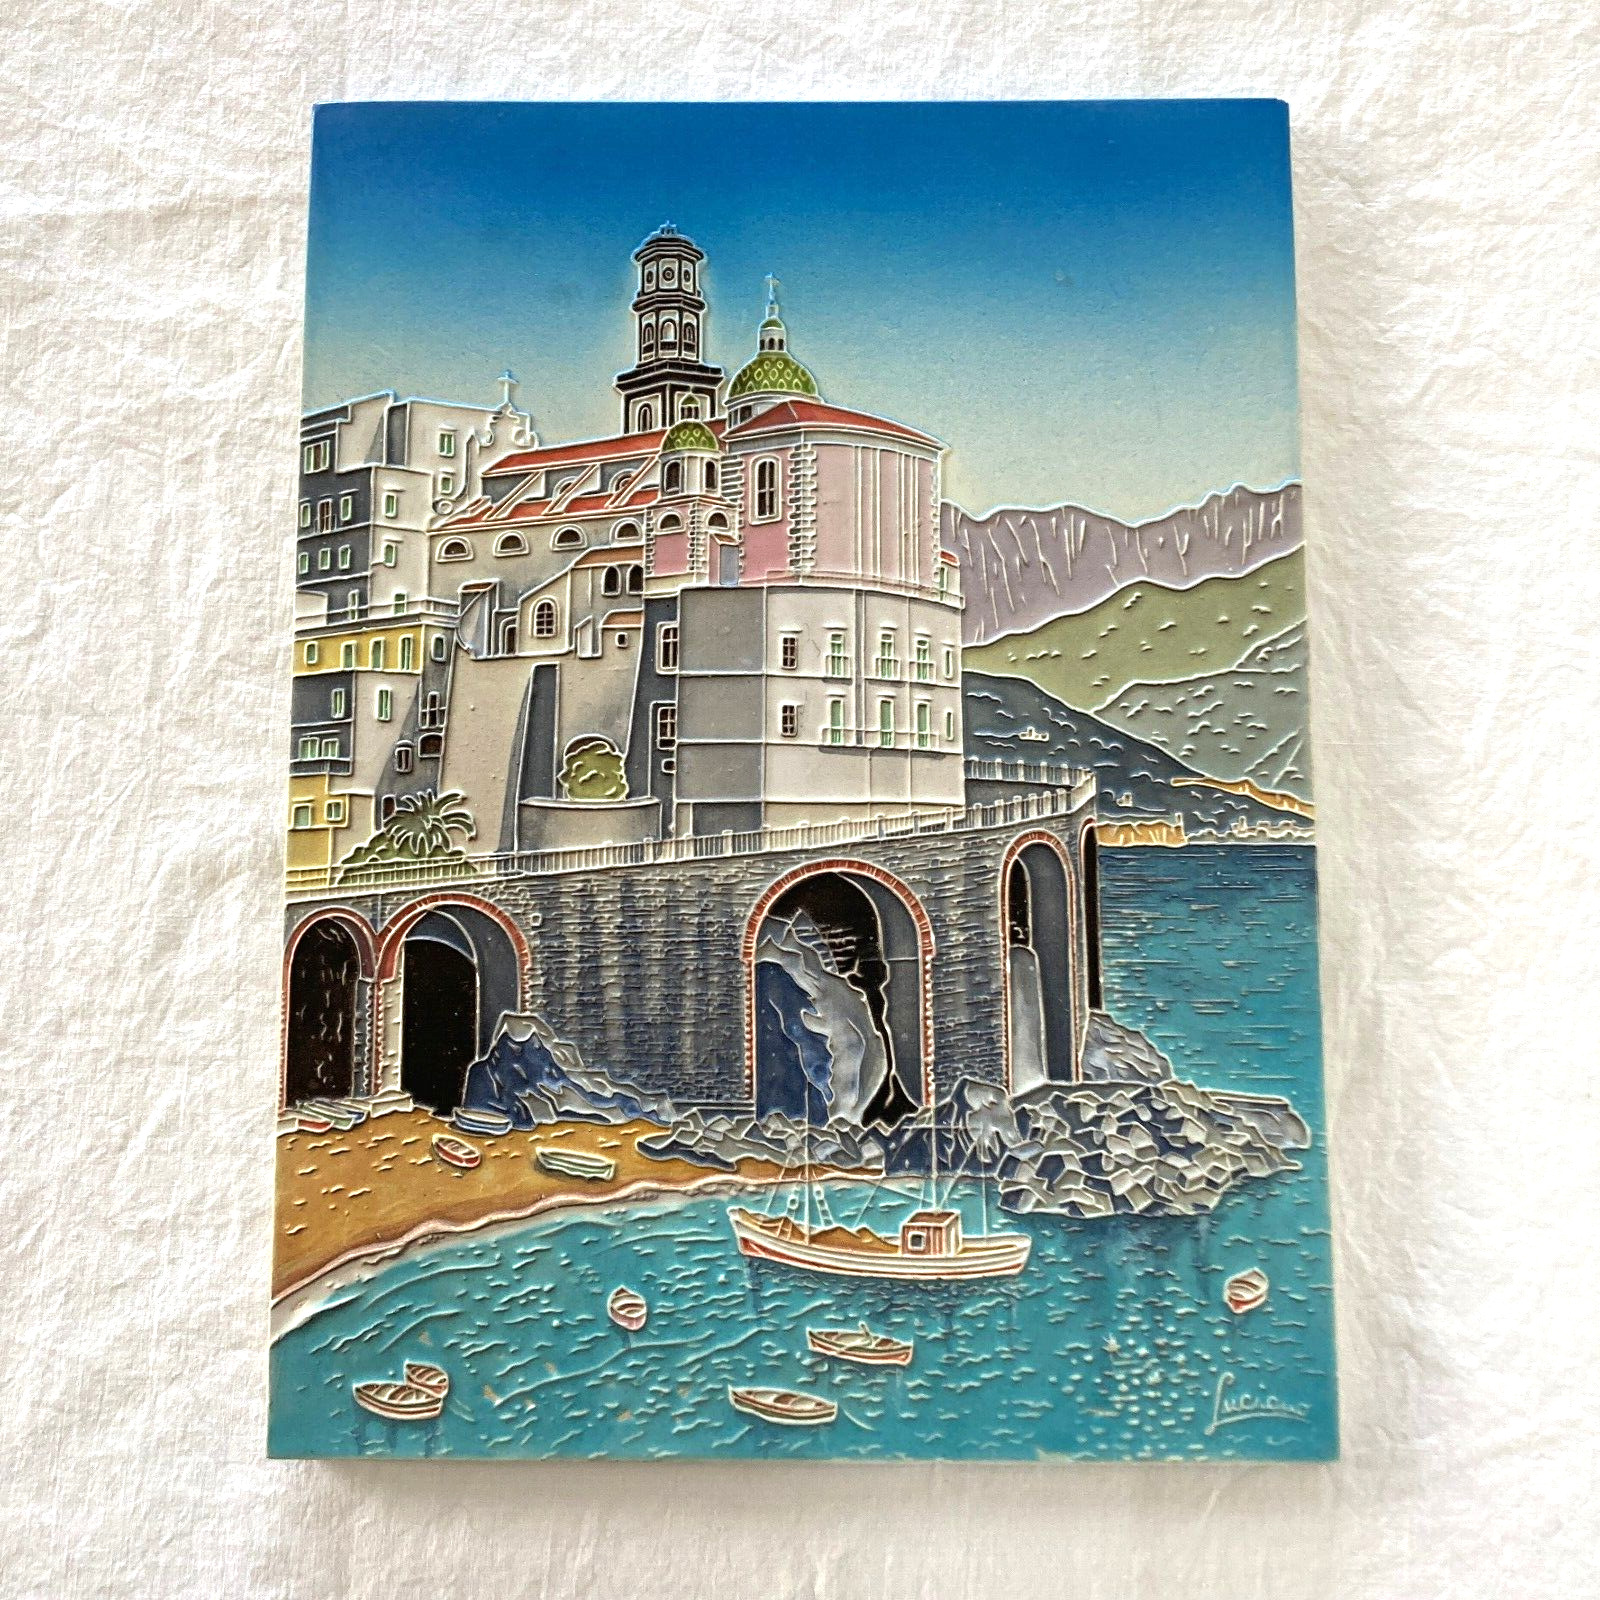 Luciano Cloisonne Wall Hanging Plaque Heavy Italy Cinque Terre 15.5x11.5 Italian